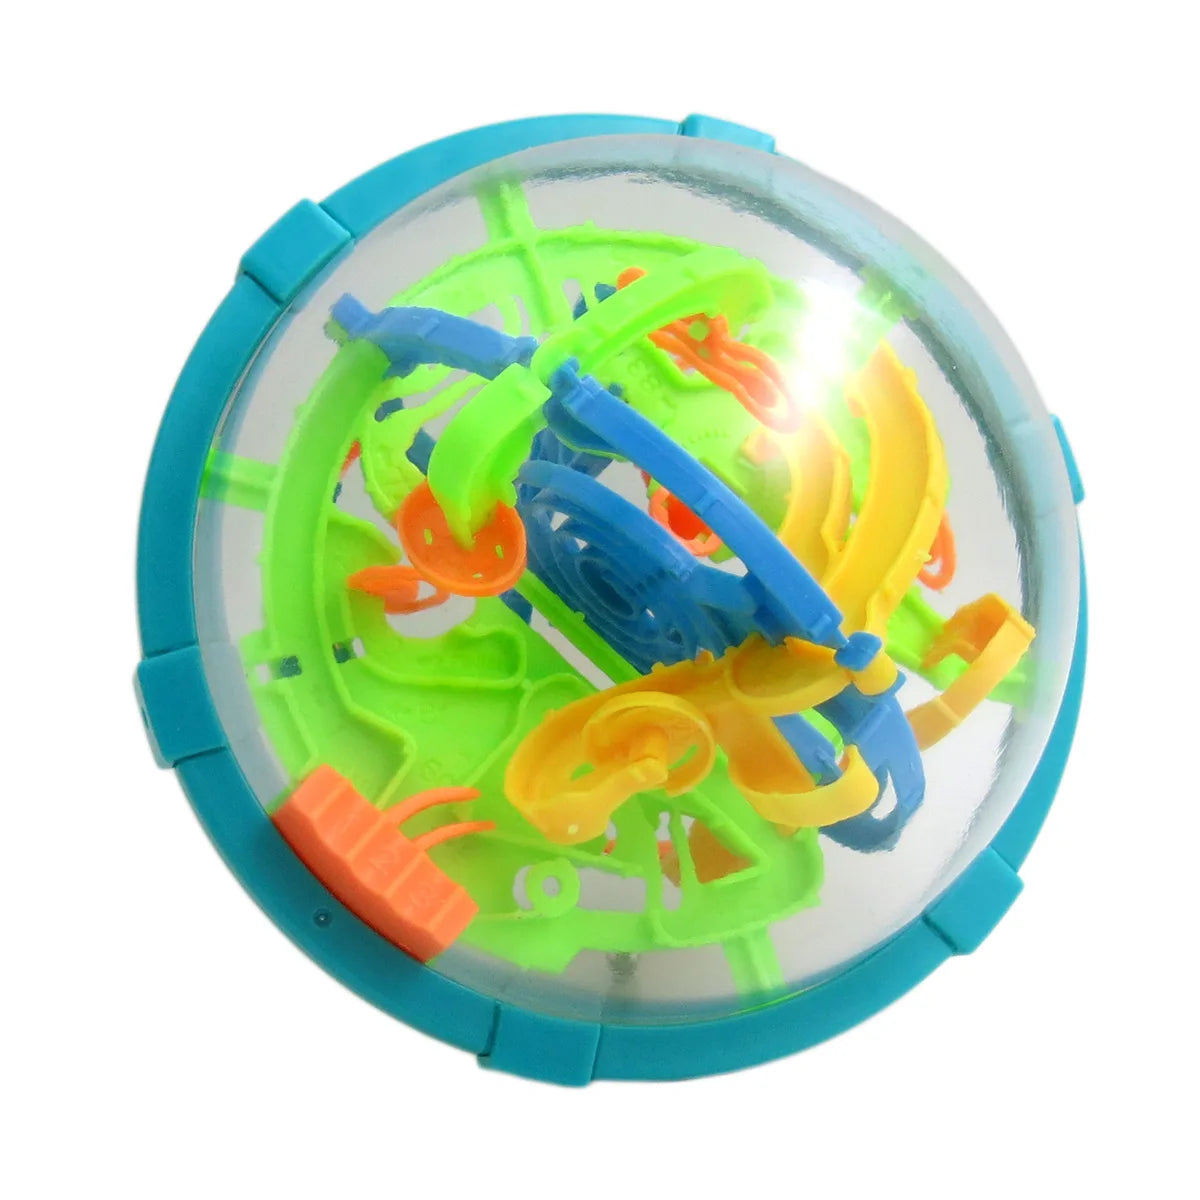 100 Steps 12cm Intellect 3D Maze Perplexus Magnetic Ball Barriers Marble Puzzle Amaze Game IQ Balance Educational Toys For Kids